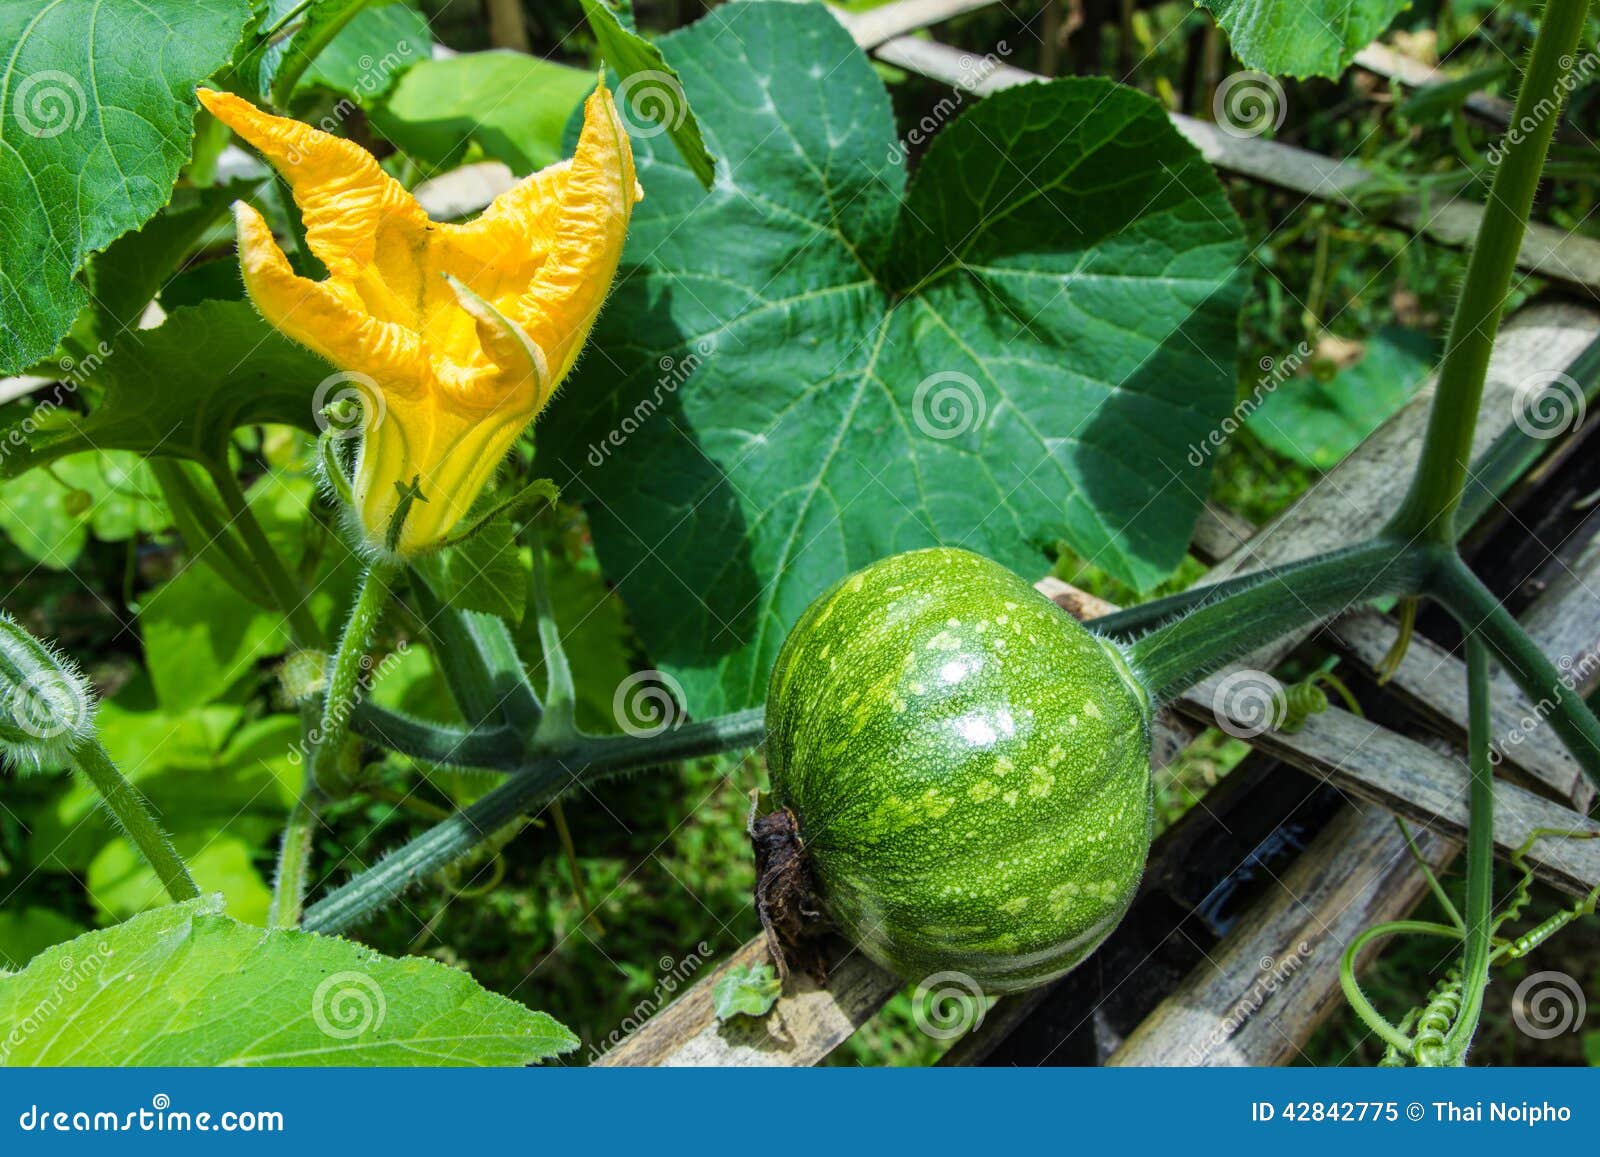 beautiful young pumpkins on the field